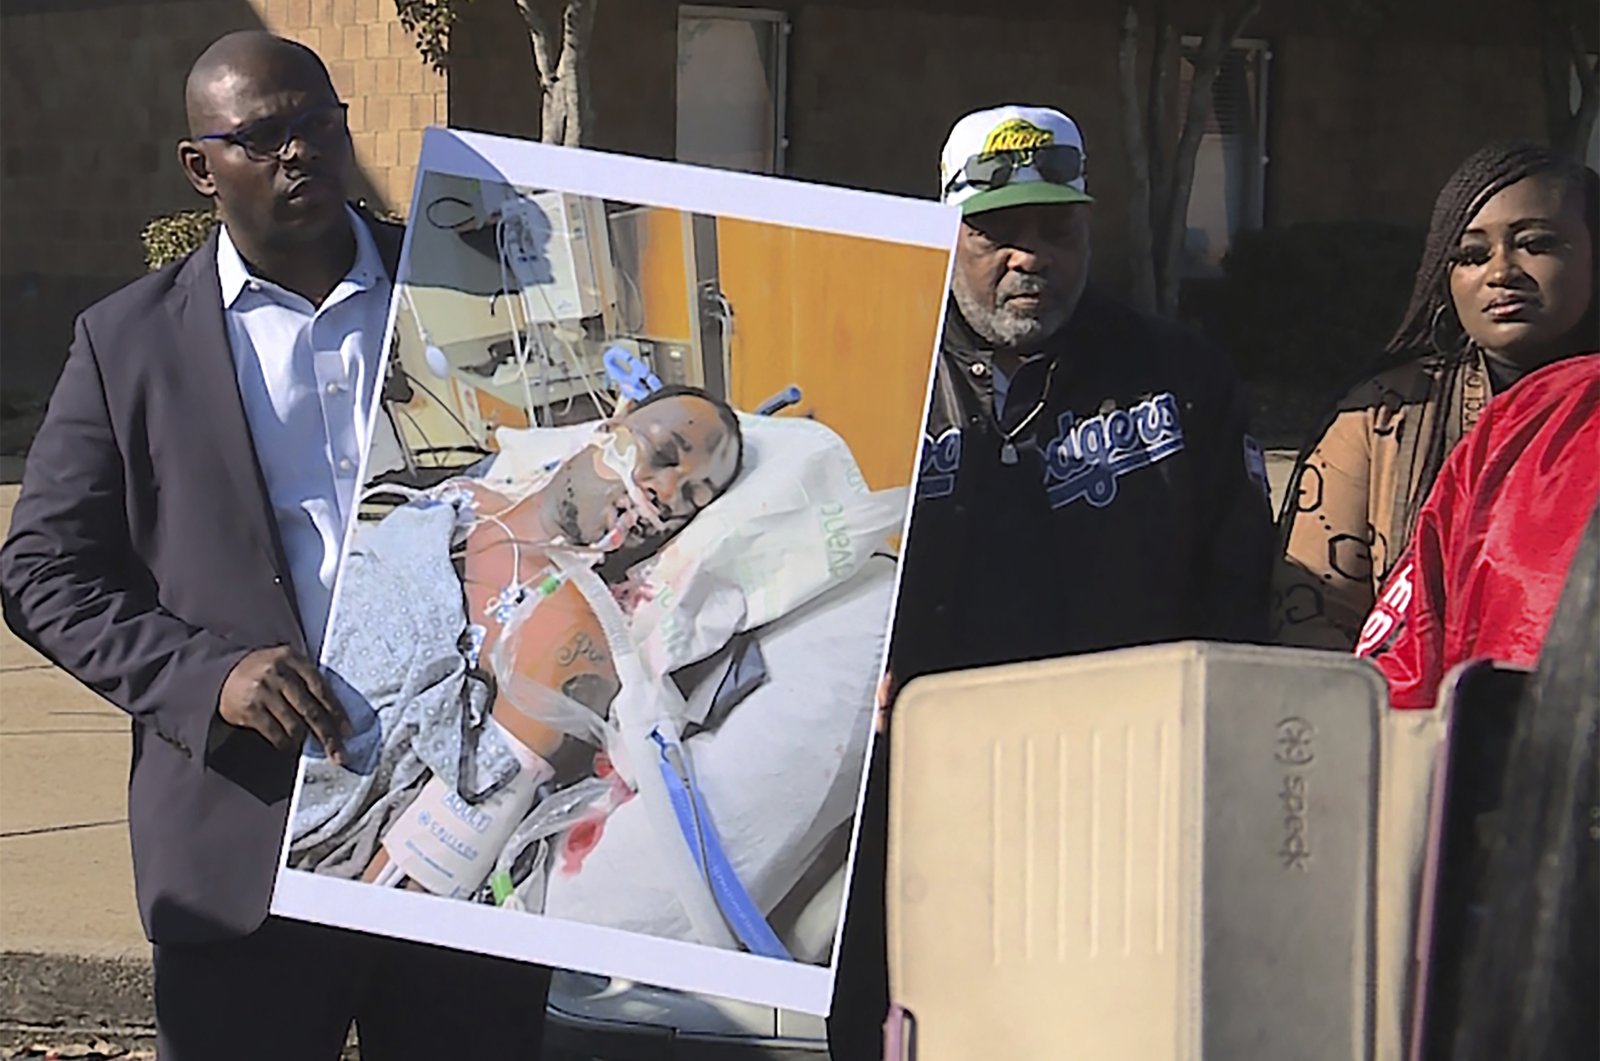 Tyre Nichols&#039; stepfather Rodney Wells (C) stands next to a photo of Nichols in the hospital after his arrest, during a protest in Memphis, Tennesse, U.S., Jan. 14, 2023. (AP Photo)